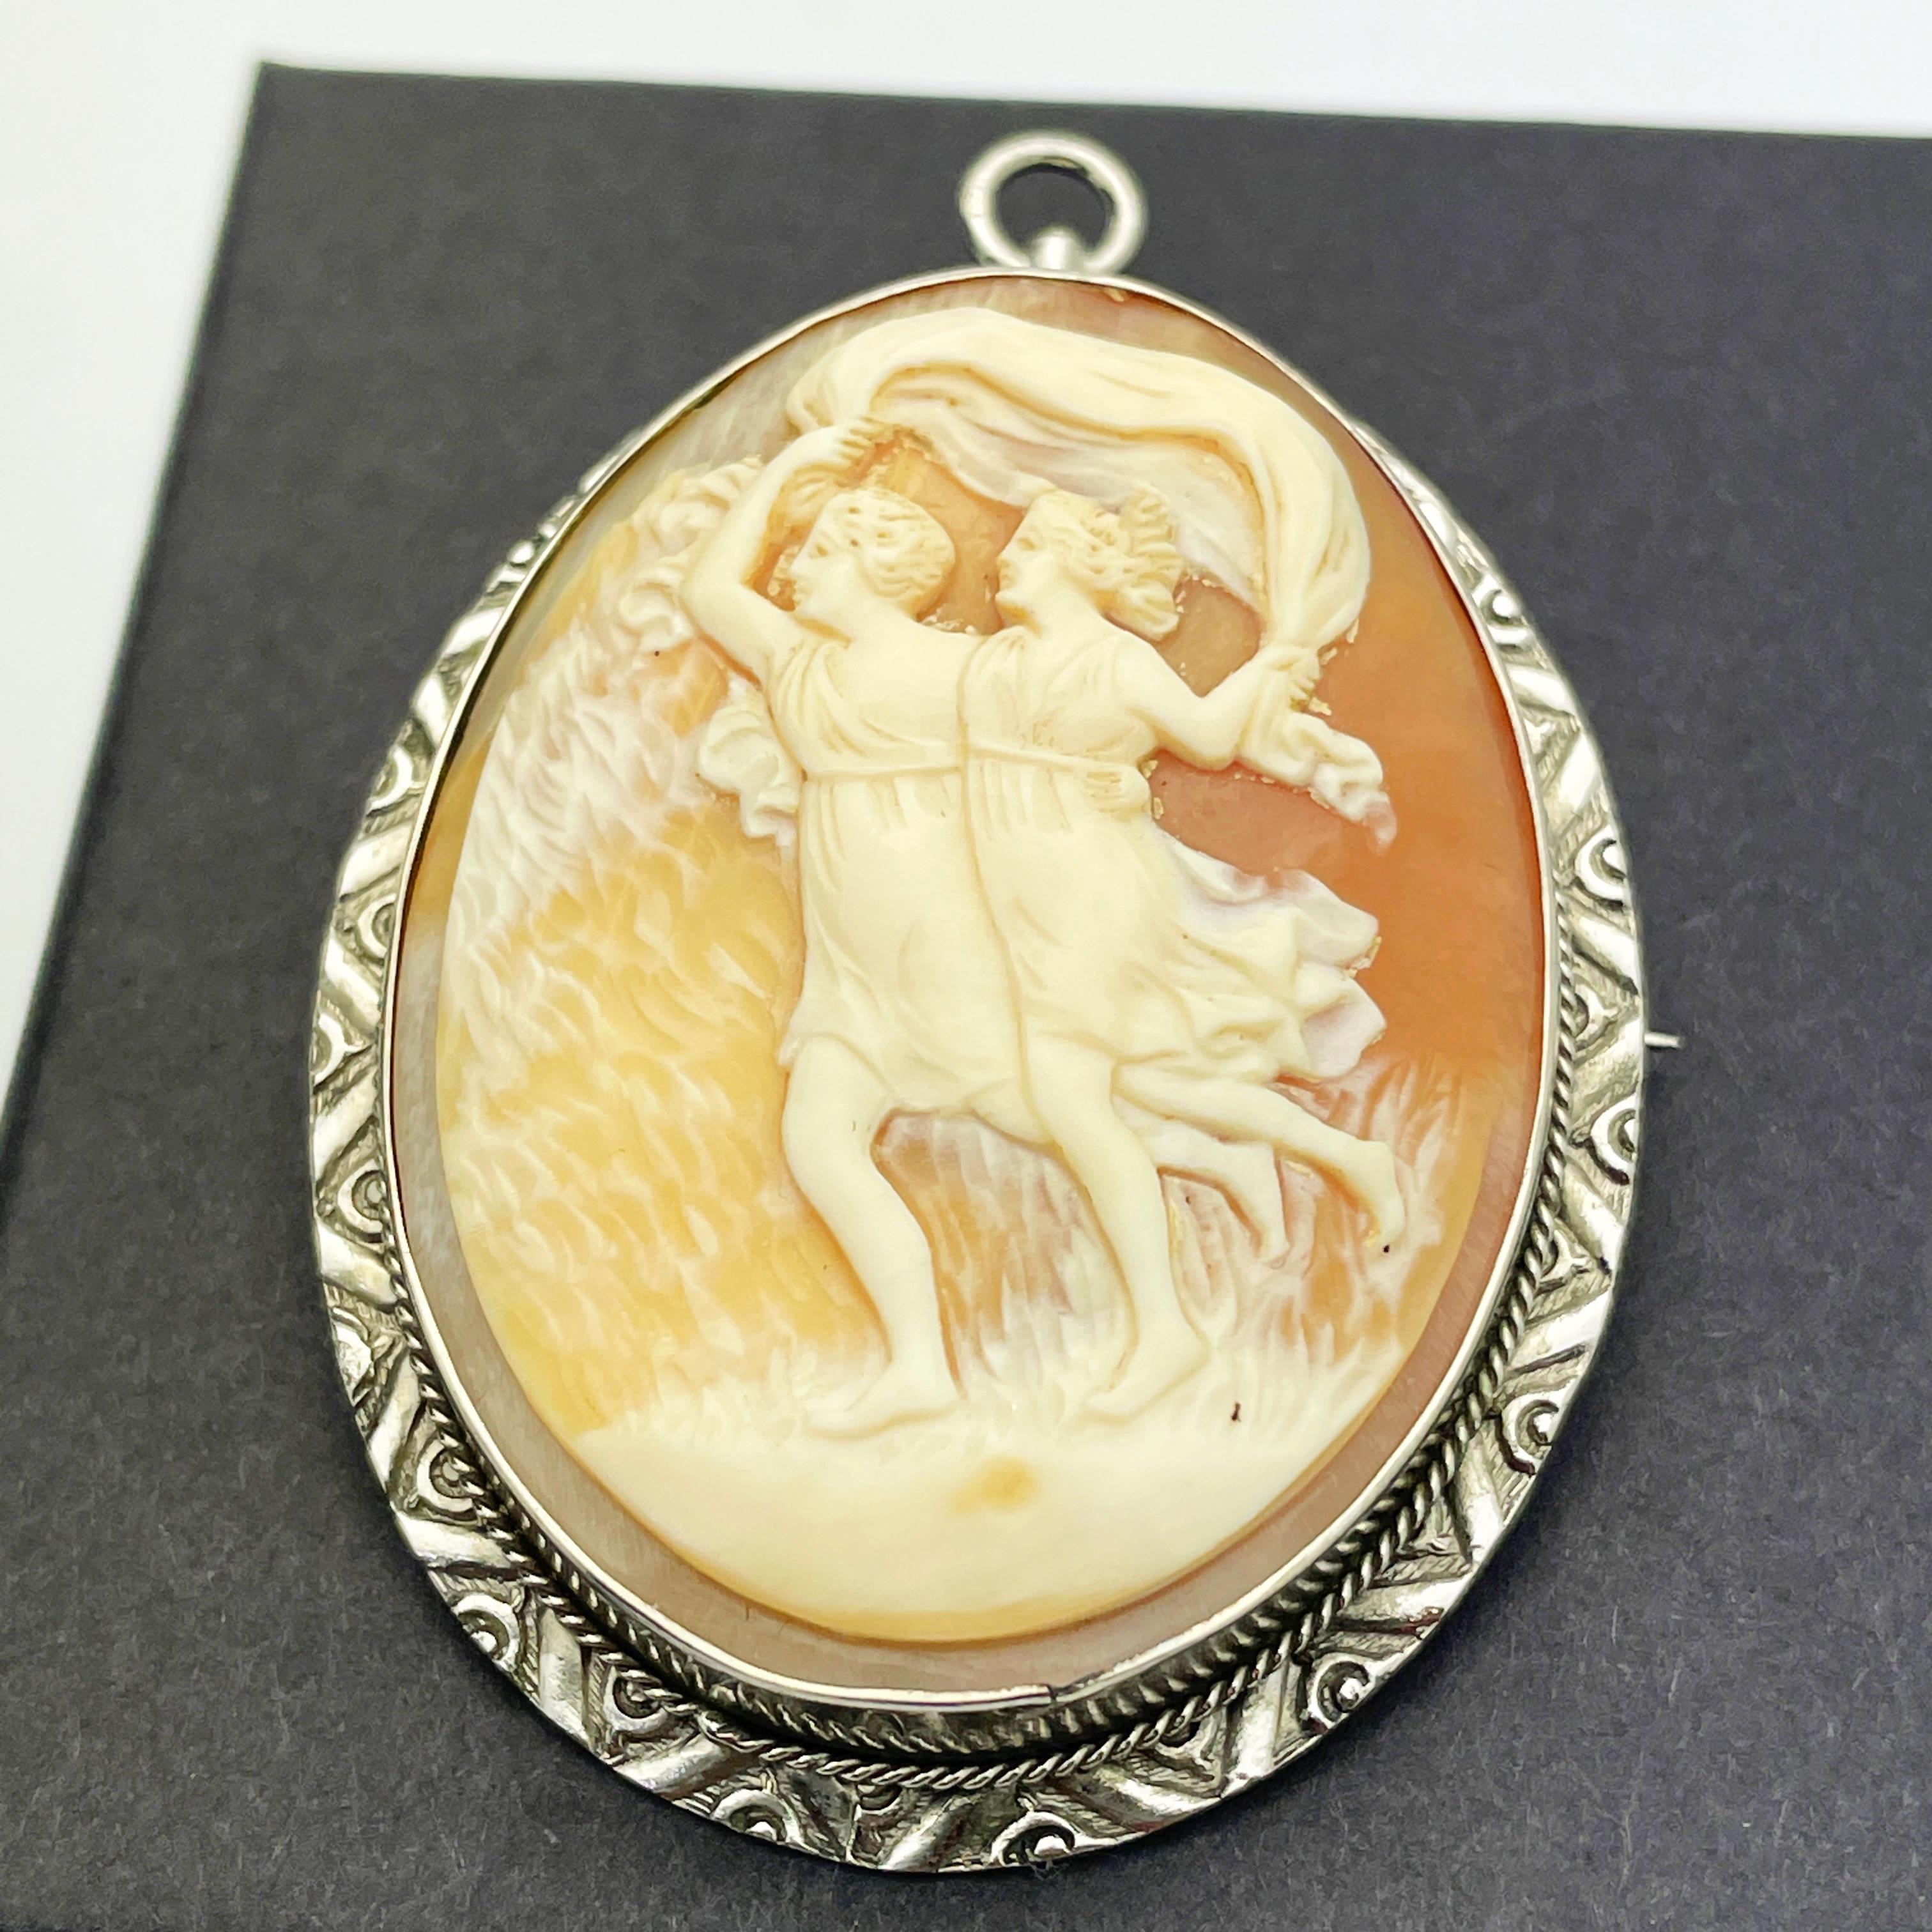 Here is a lovely 14k White Gold Shell Cameo Pendant/Brooch.

This brooch features an oval shaped reddish brown shell cameo featuring a woman and man running with a veil. Shell measures approx. 38.25mmx 30.00mm. Can be worn either as a brooch or a